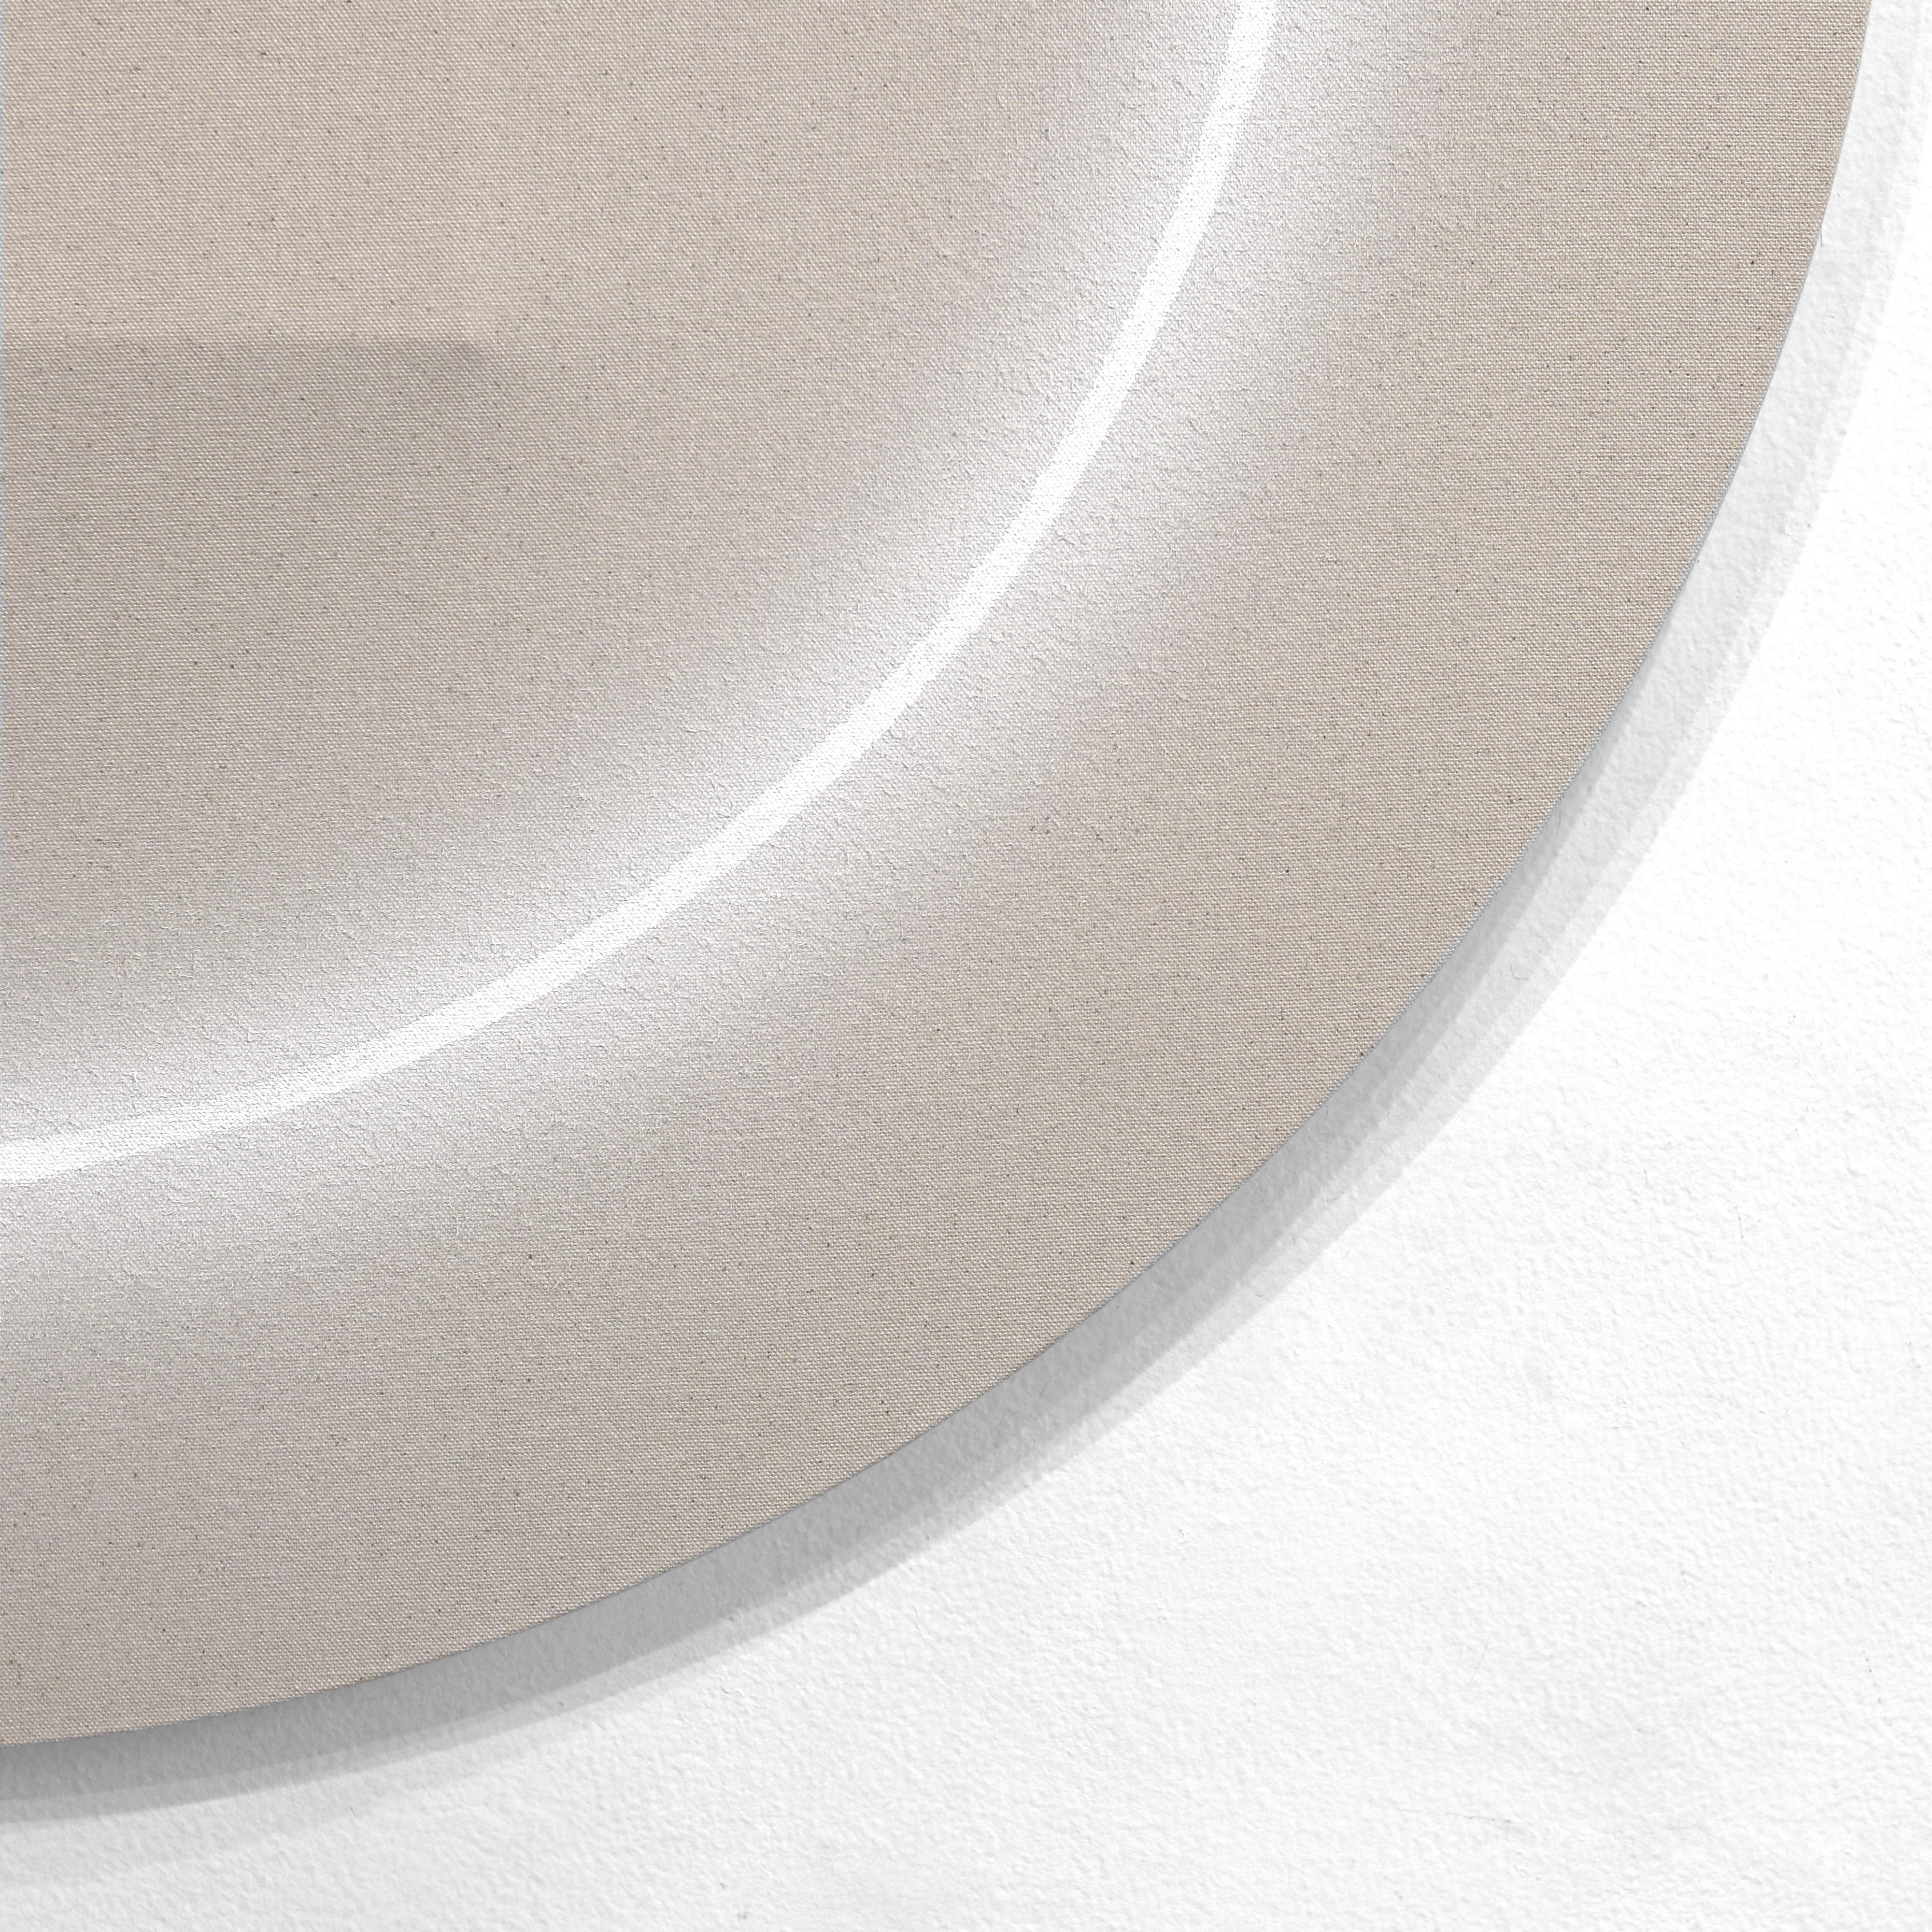 Halo Orb Squared - Minimalist Dimensional Architectural Wall Sculpture Artwork For Sale 5